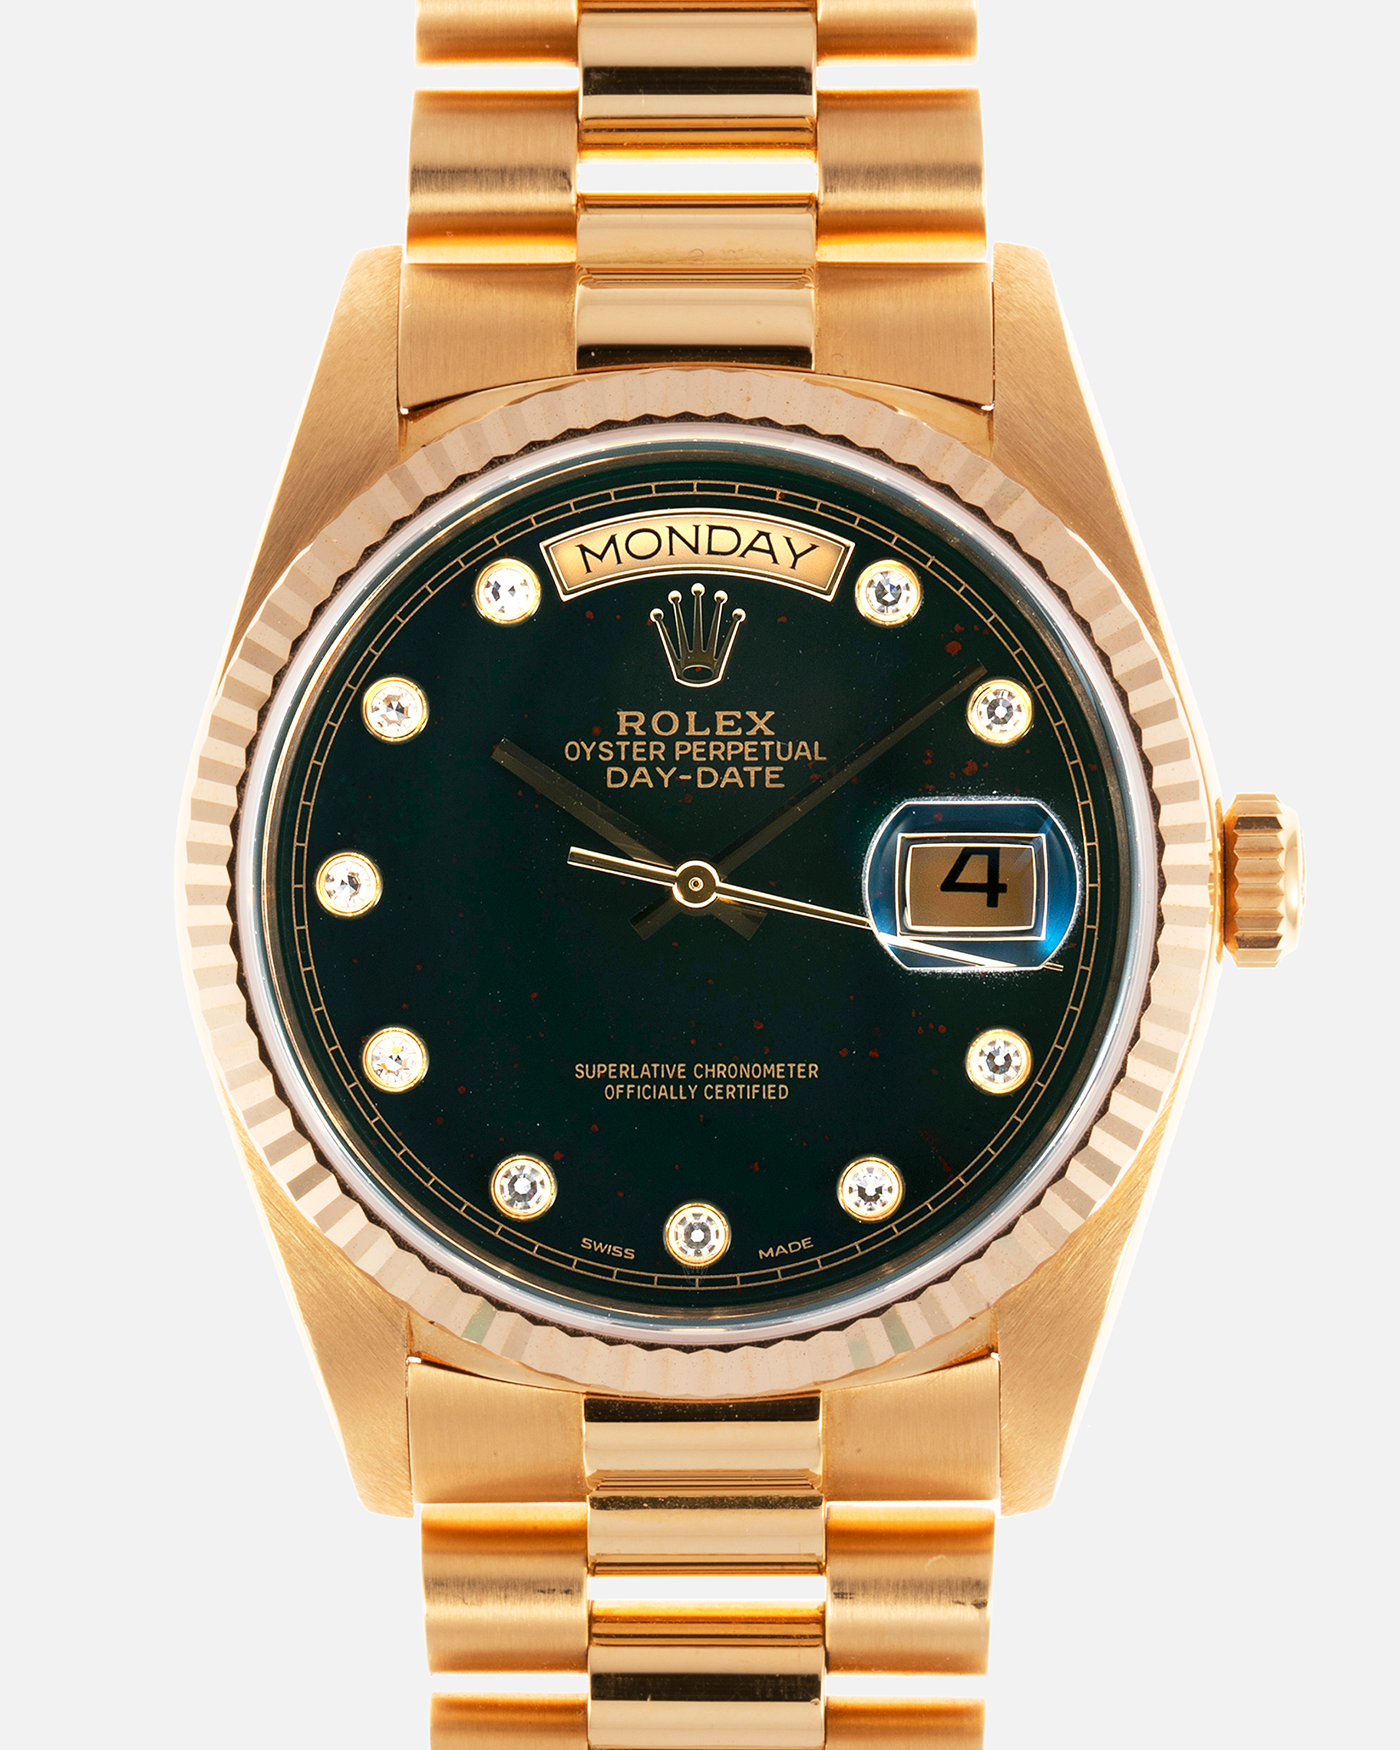 Brand: Rolex Year: 1987 Model: Day Date Reference Number: 18038 Serial: 9.8 Mil Material: 18k Yellow Gold Movement: Cal. 3055 Case Diameter: 36mm Lug Width: 20mm Bracelet/Strap: Rolex 838518k Solid Gold President Bracelet